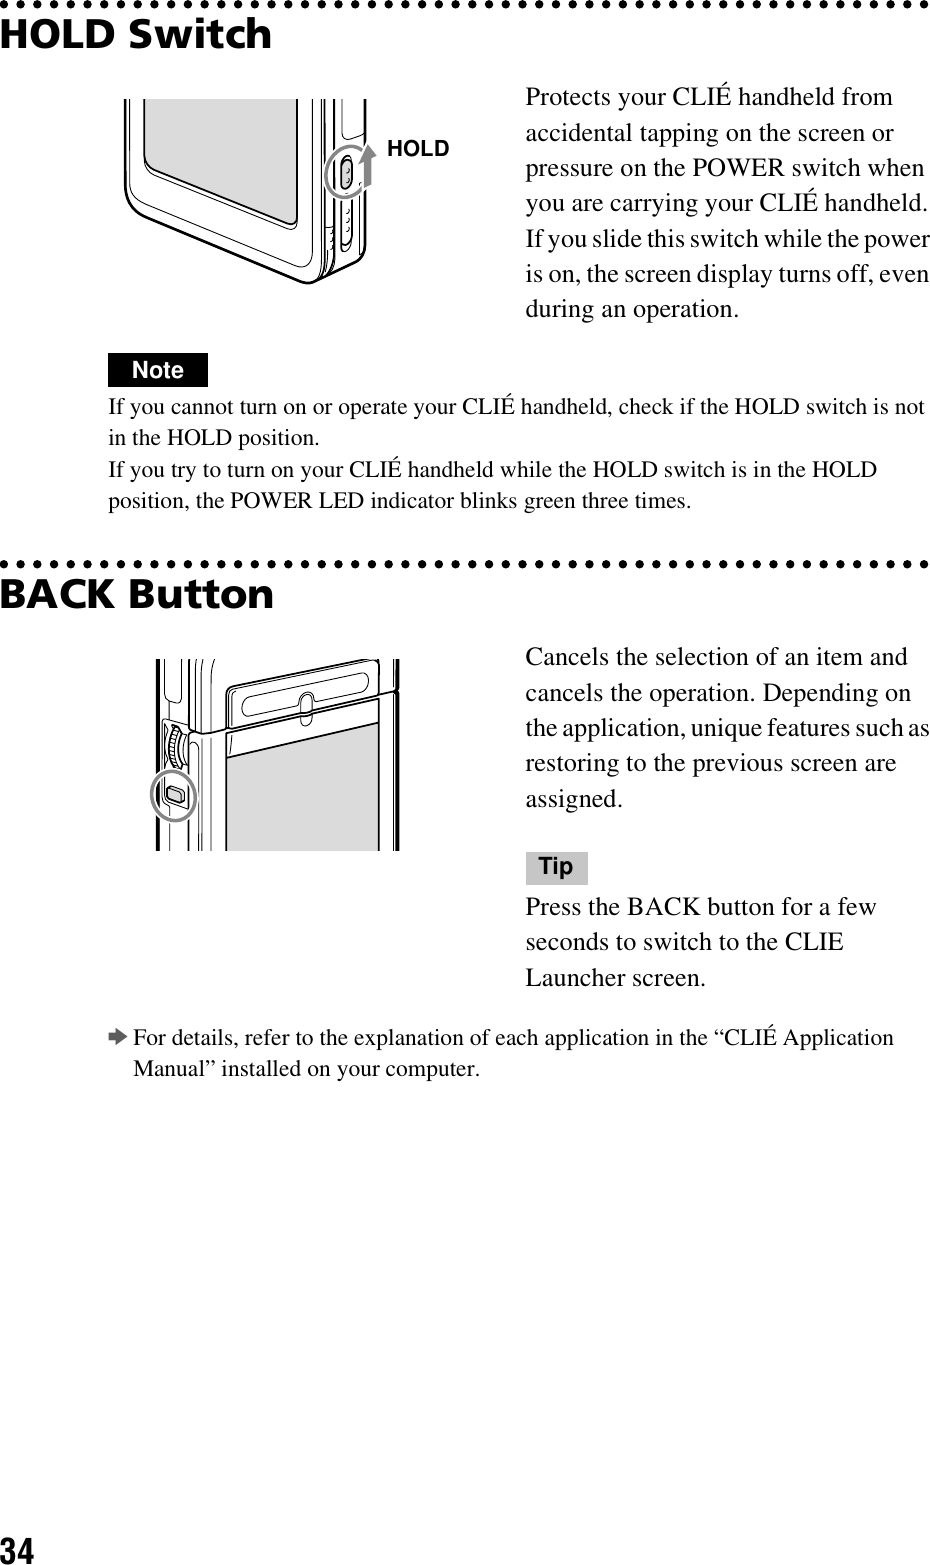 34HOLD SwitchNoteIf you cannot turn on or operate your CLIÉ handheld, check if the HOLD switch is not in the HOLD position.If you try to turn on your CLIÉ handheld while the HOLD switch is in the HOLD position, the POWER LED indicator blinks green three times.BACK ButtonbFor details, refer to the explanation of each application in the “CLIÉ Application Manual” installed on your computer.Protects your CLIÉ handheld from accidental tapping on the screen or pressure on the POWER switch when you are carrying your CLIÉ handheld. If you slide this switch while the power is on, the screen display turns off, even during an operation.Cancels the selection of an item and cancels the operation. Depending on the application, unique features such as restoring to the previous screen are assigned.TipPress the BACK button for a few seconds to switch to the CLIE Launcher screen.HOLD